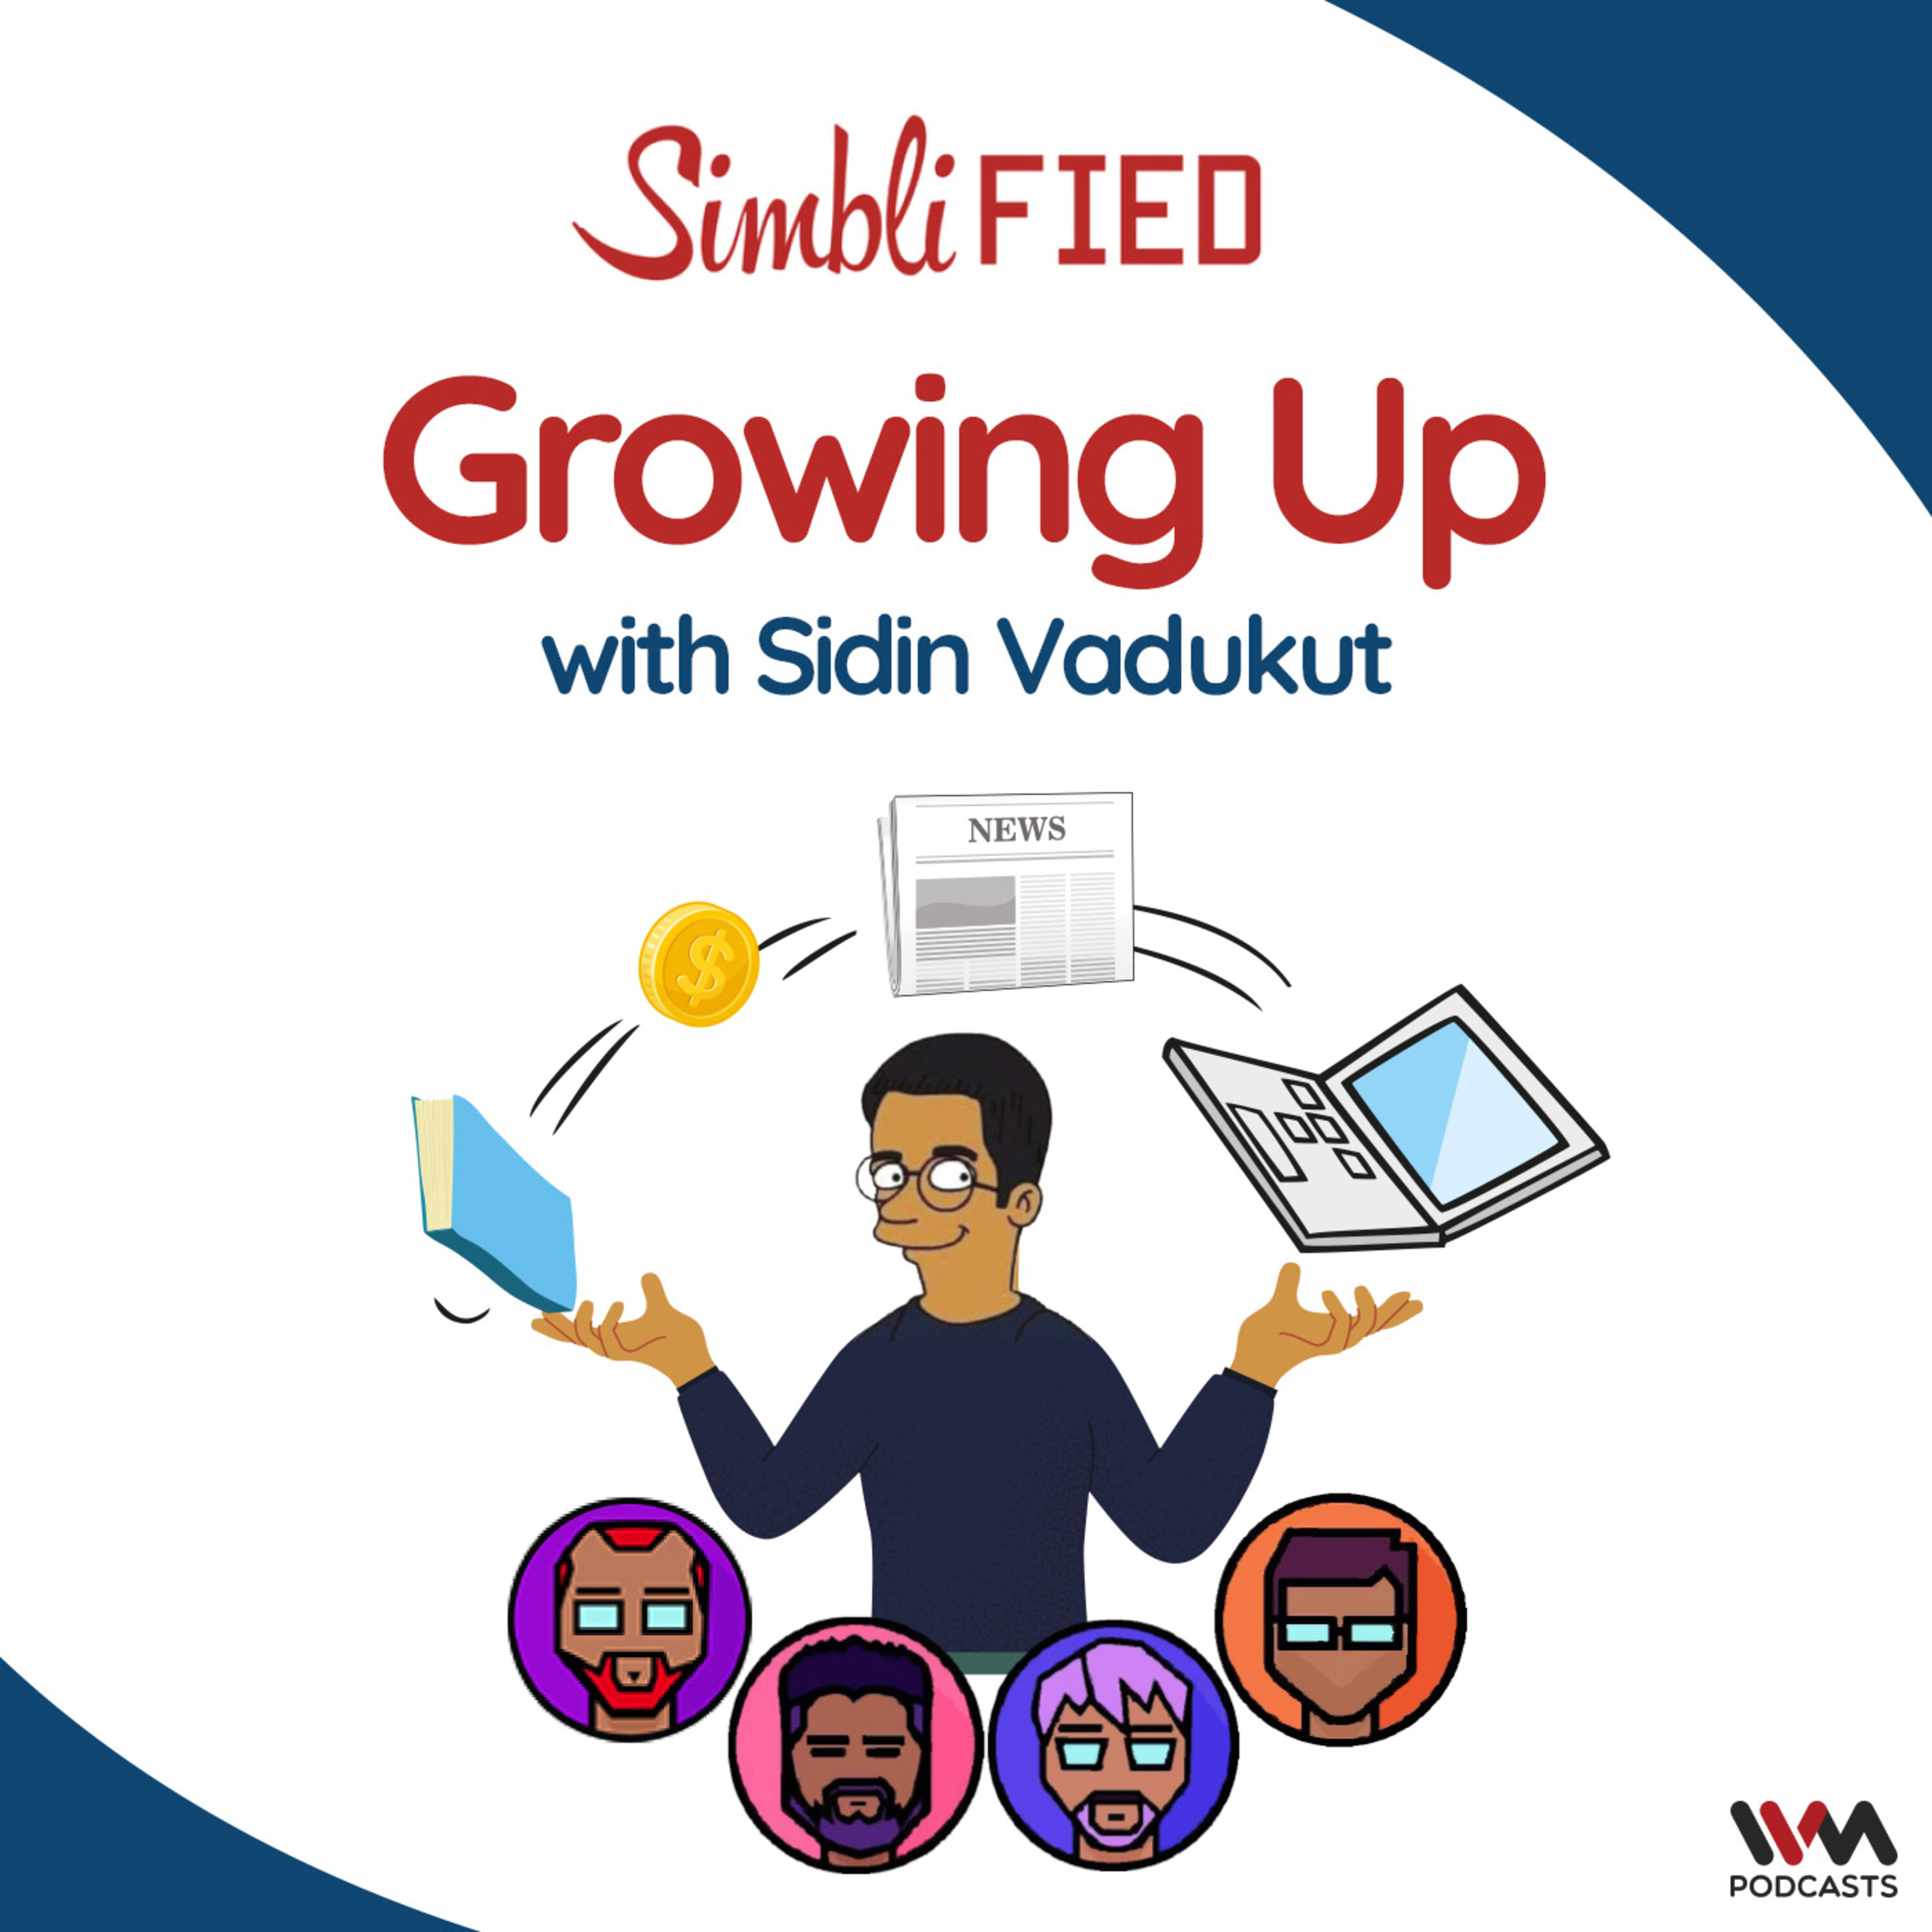 Growing up with Sidin Vadukut